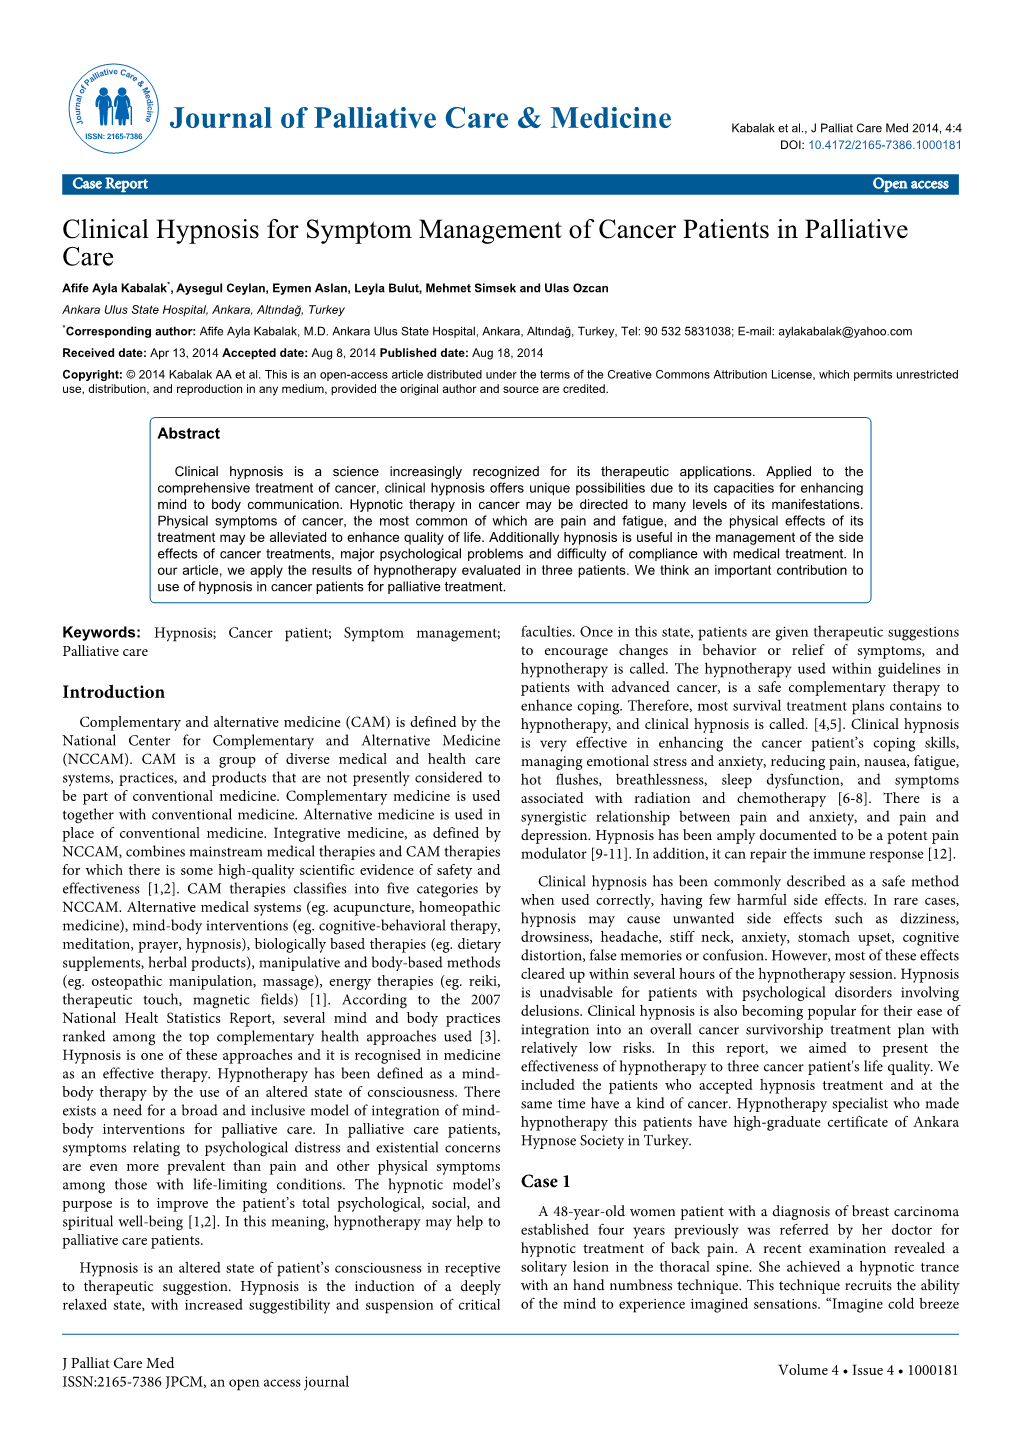 Clinical Hypnosis for Symptom Management of Cancer Patients In